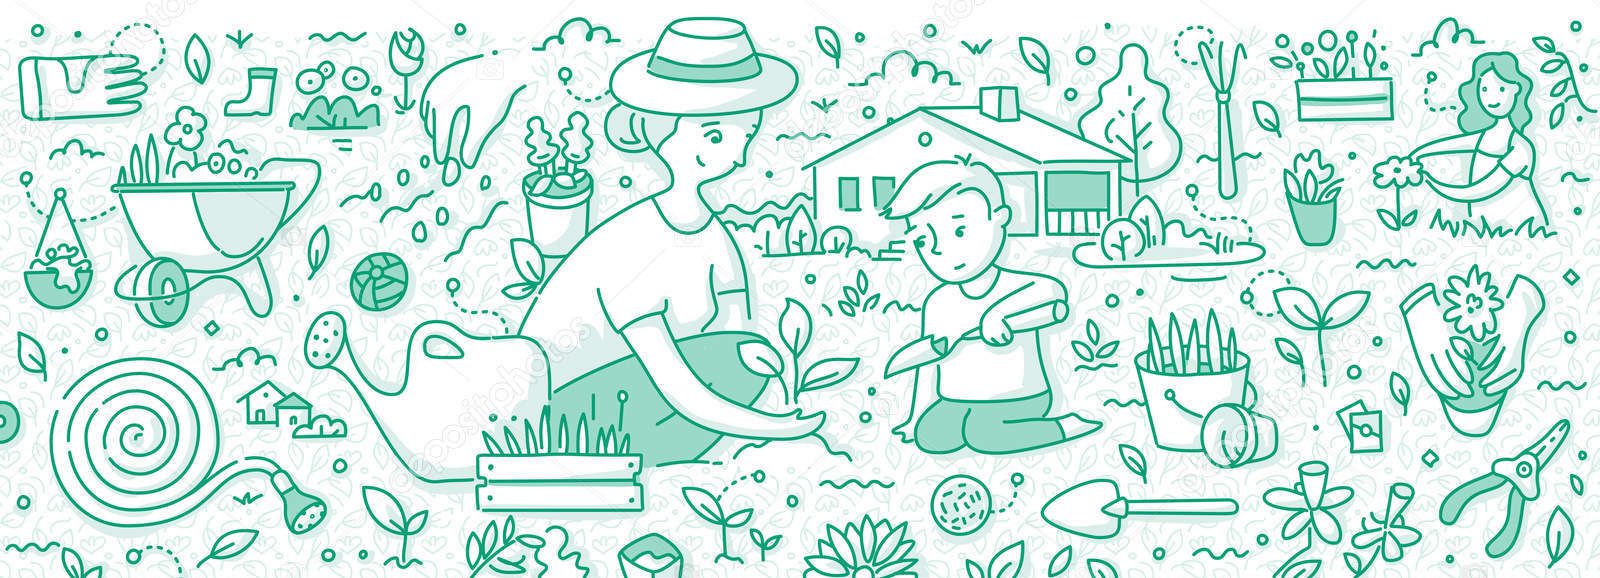 Mother and her little son planting flowers and herds in the garden near the home. Doodle concept of gardening for web banner, hero images and printing materials